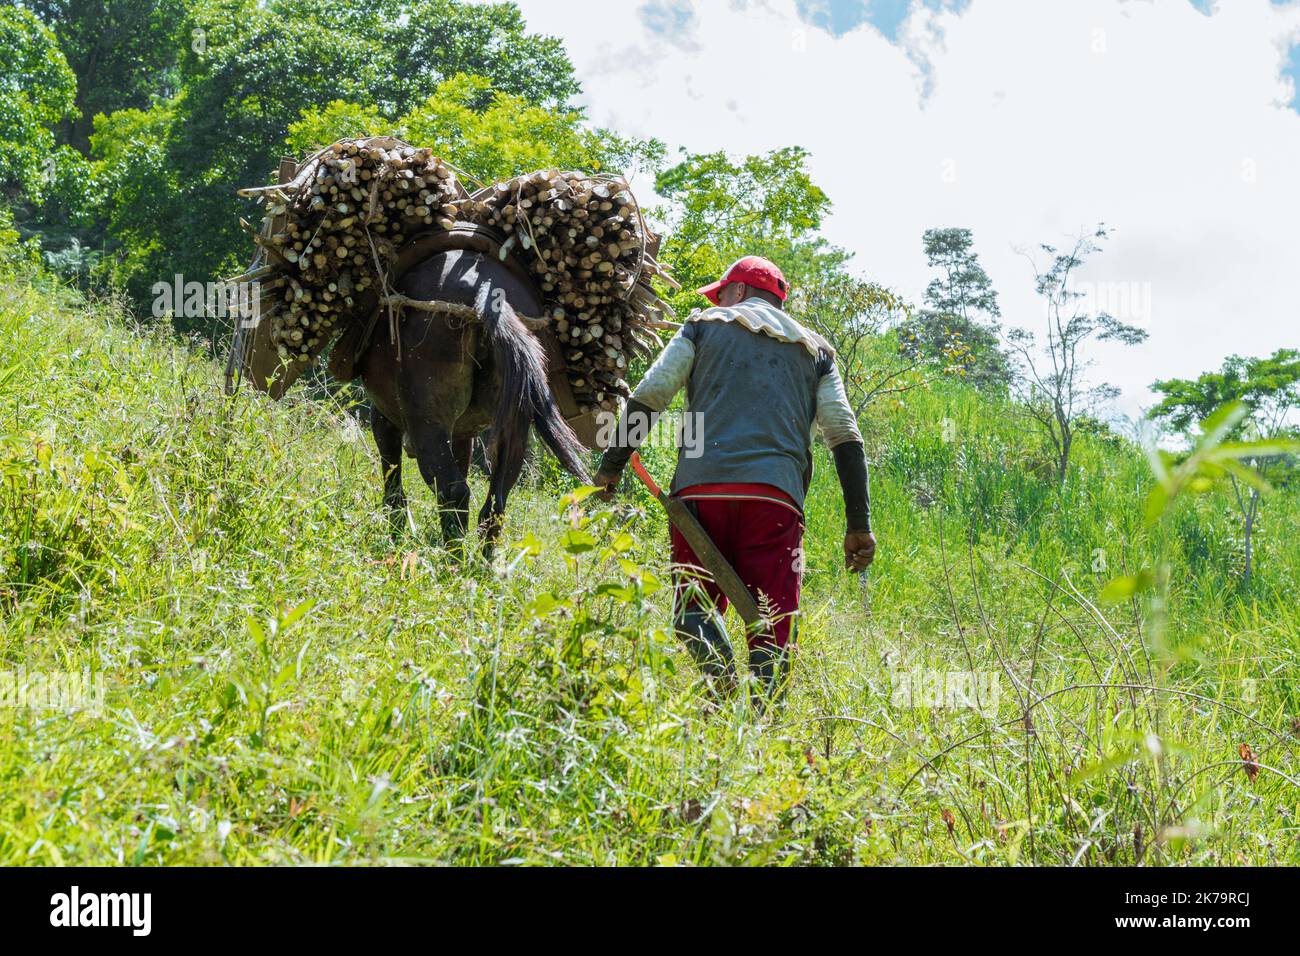 muleteer in the paisa region of colombia carrying a load of sugar cane with his mule up a mountain to reach the sugar mill. concept of peasant work. Stock Photo